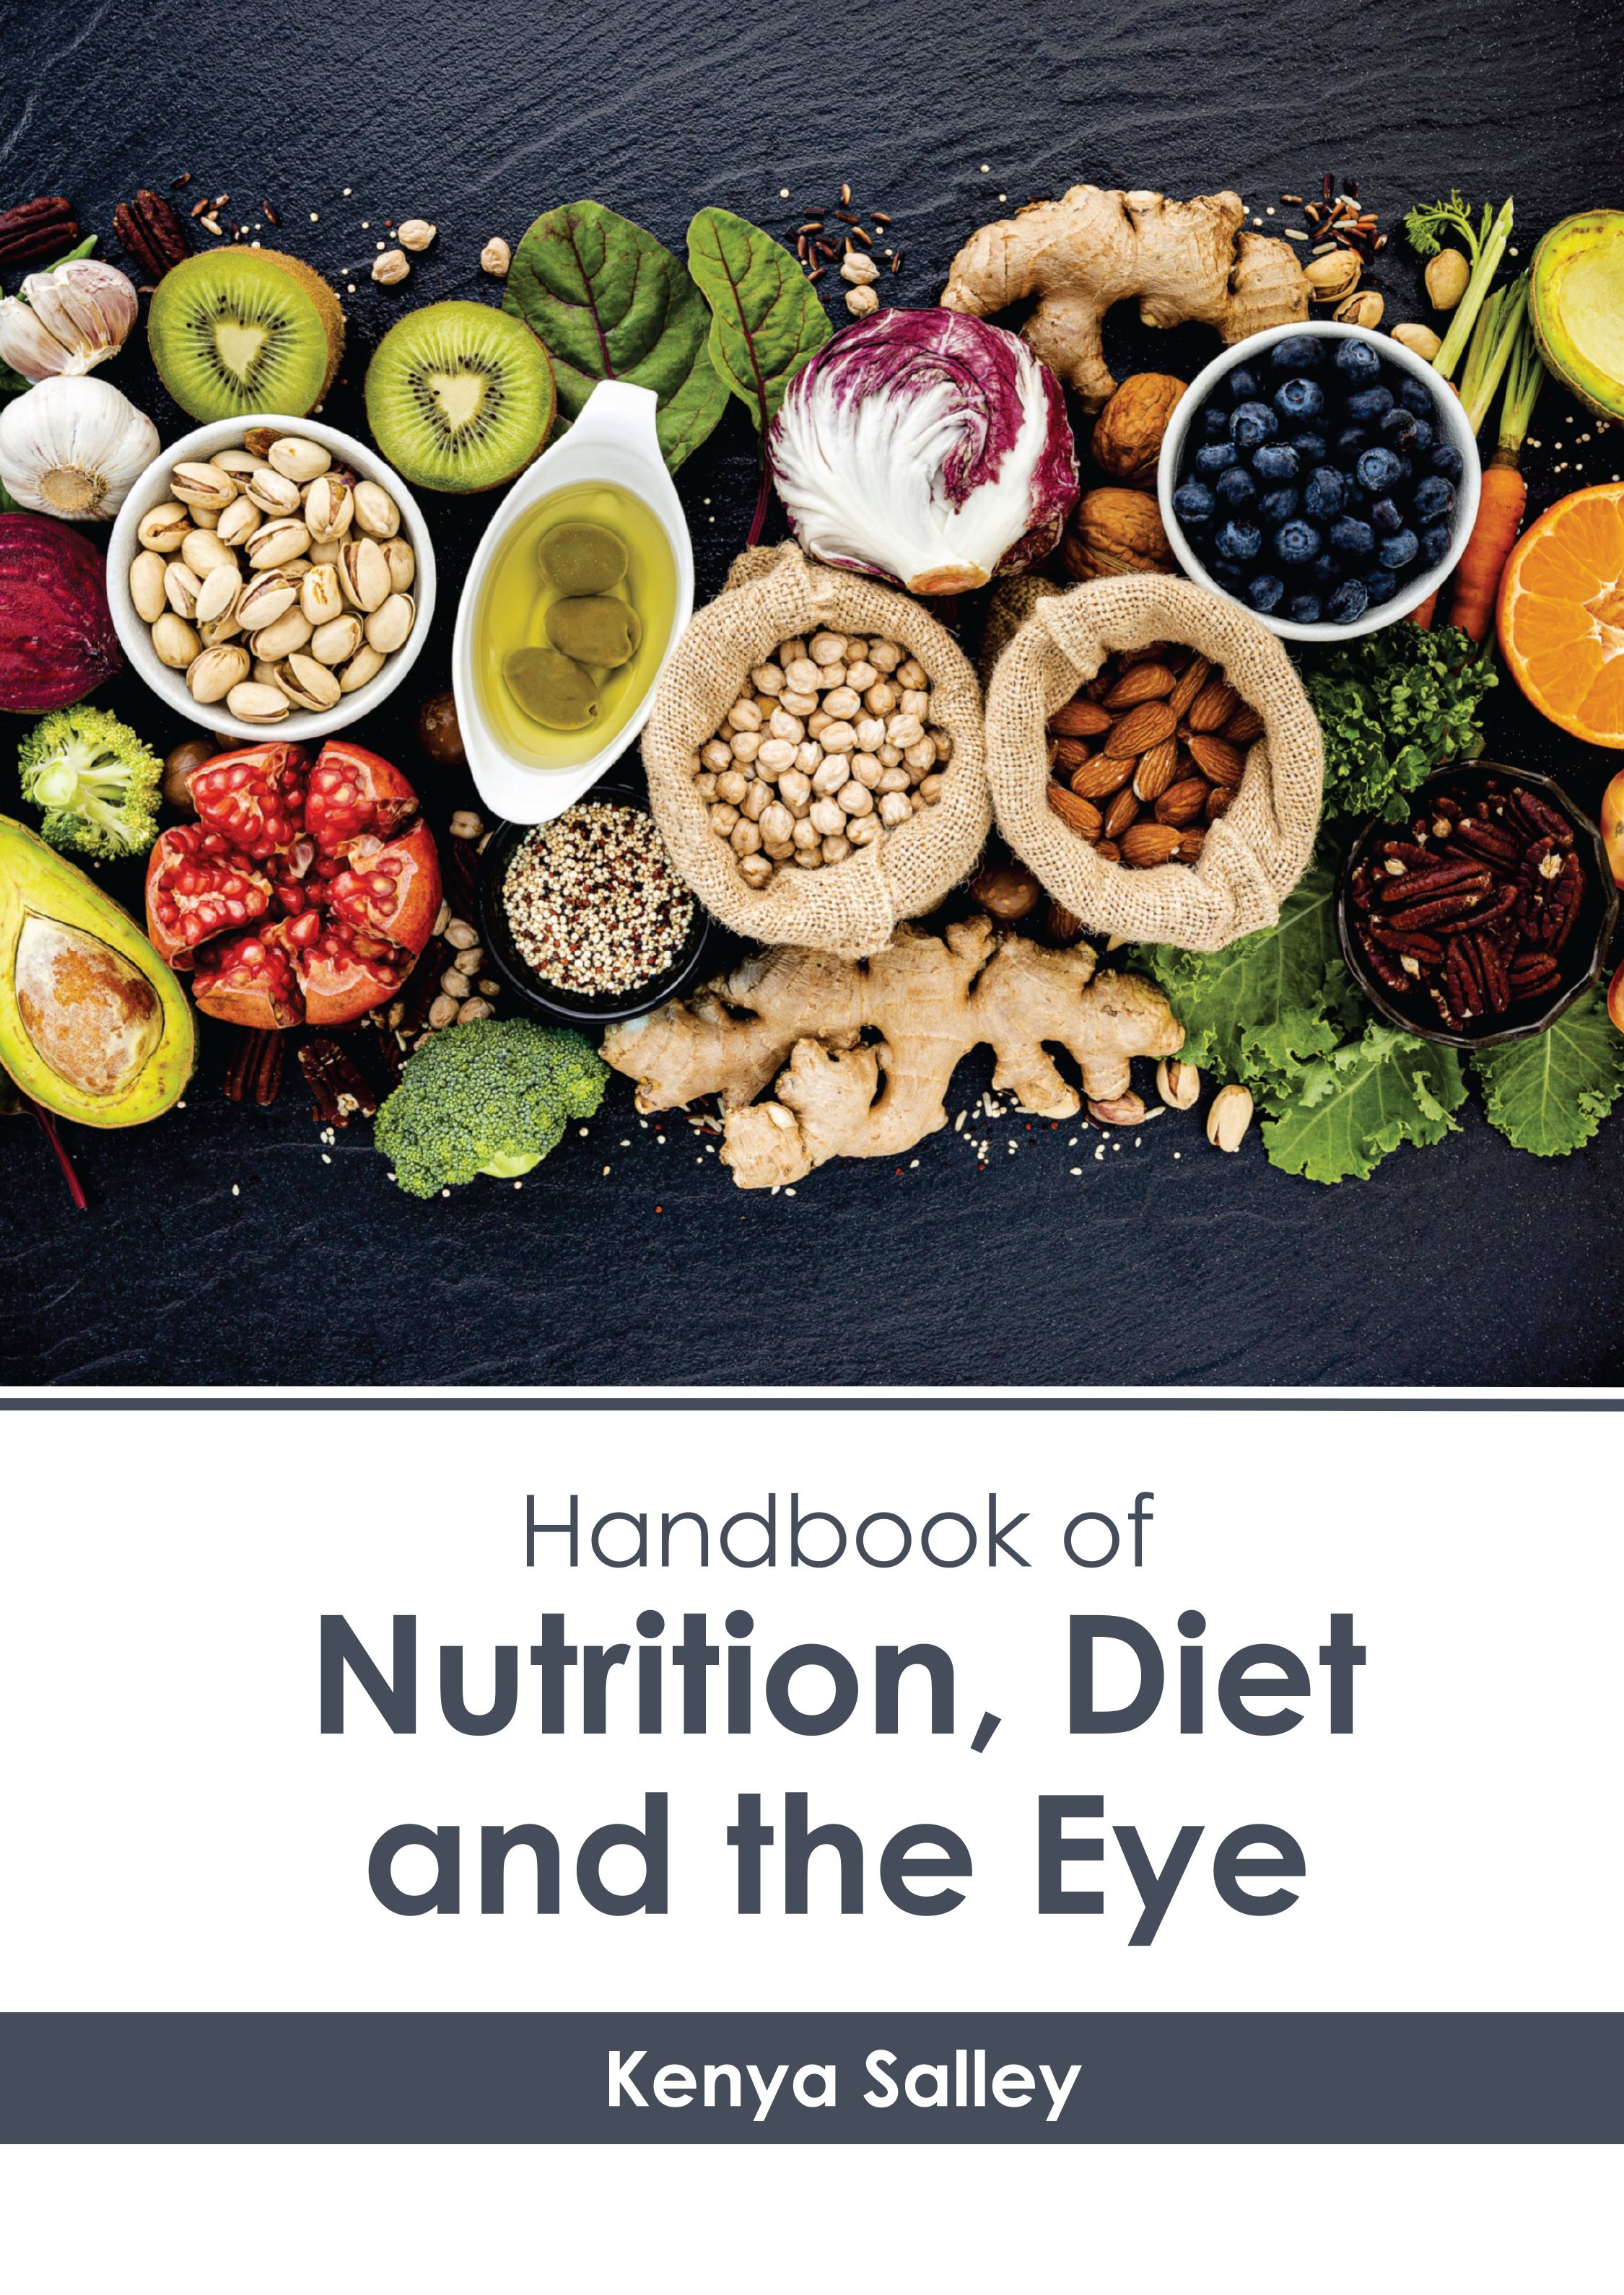 HANDBOOK OF NUTRITION, DIET AND THE EYE